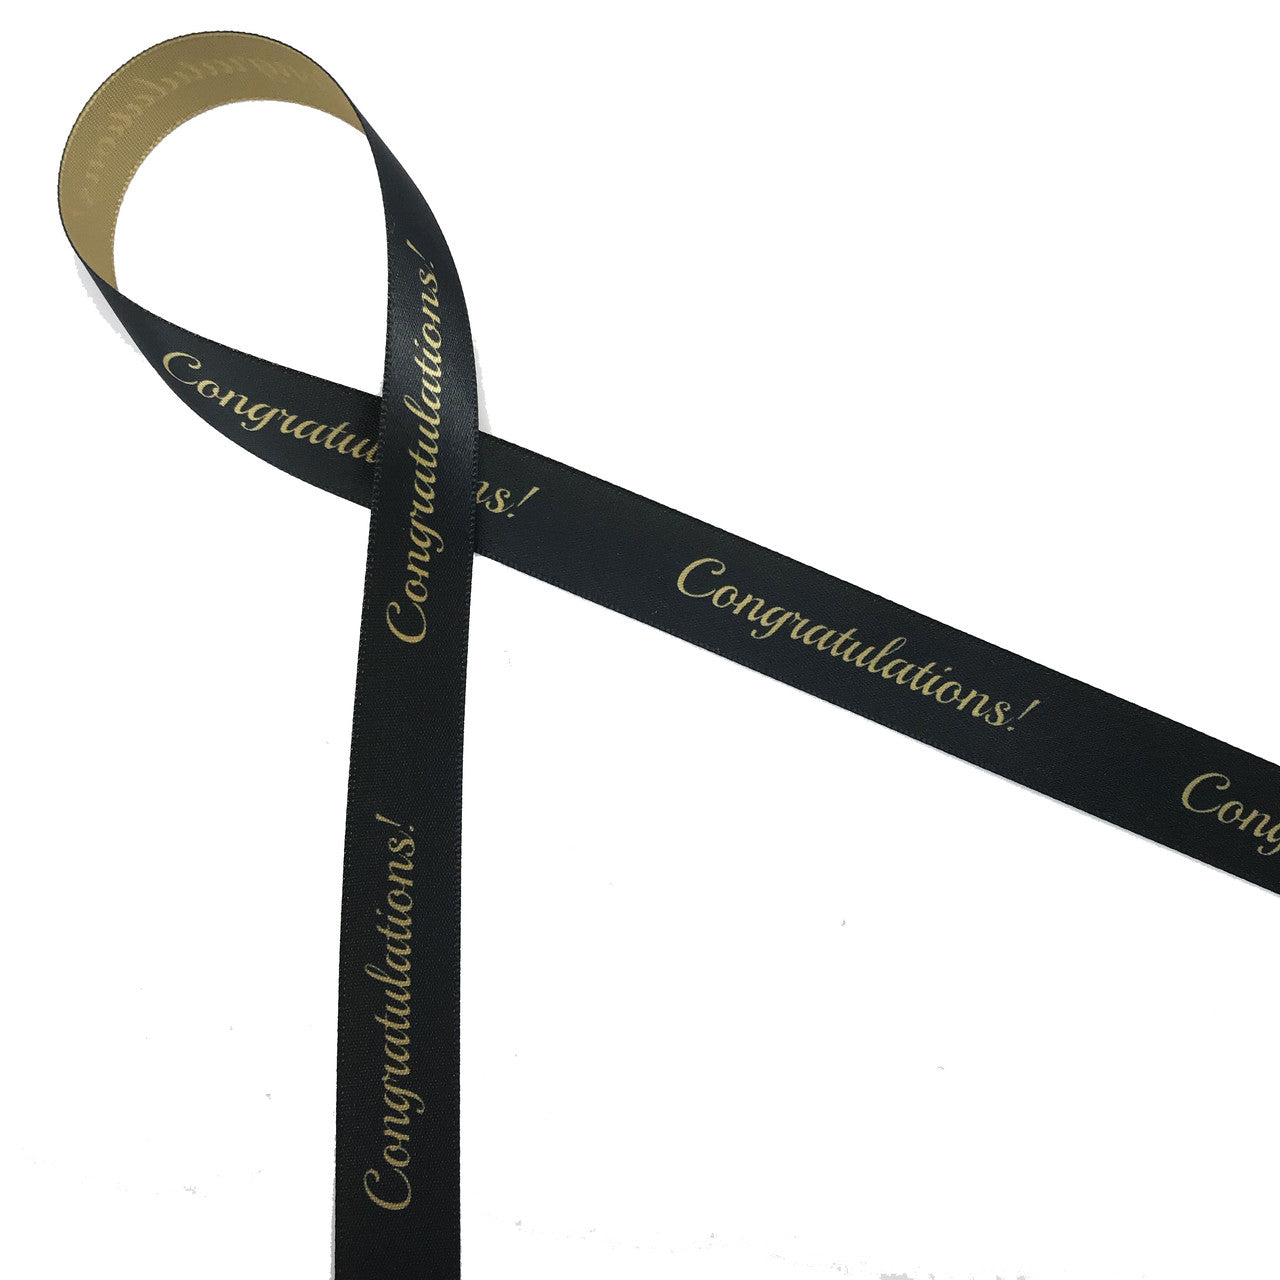 Congratulations in gold on a black background printed on 5/8" dijon gold ribbon is a handsome way to make a special event extra sweet!